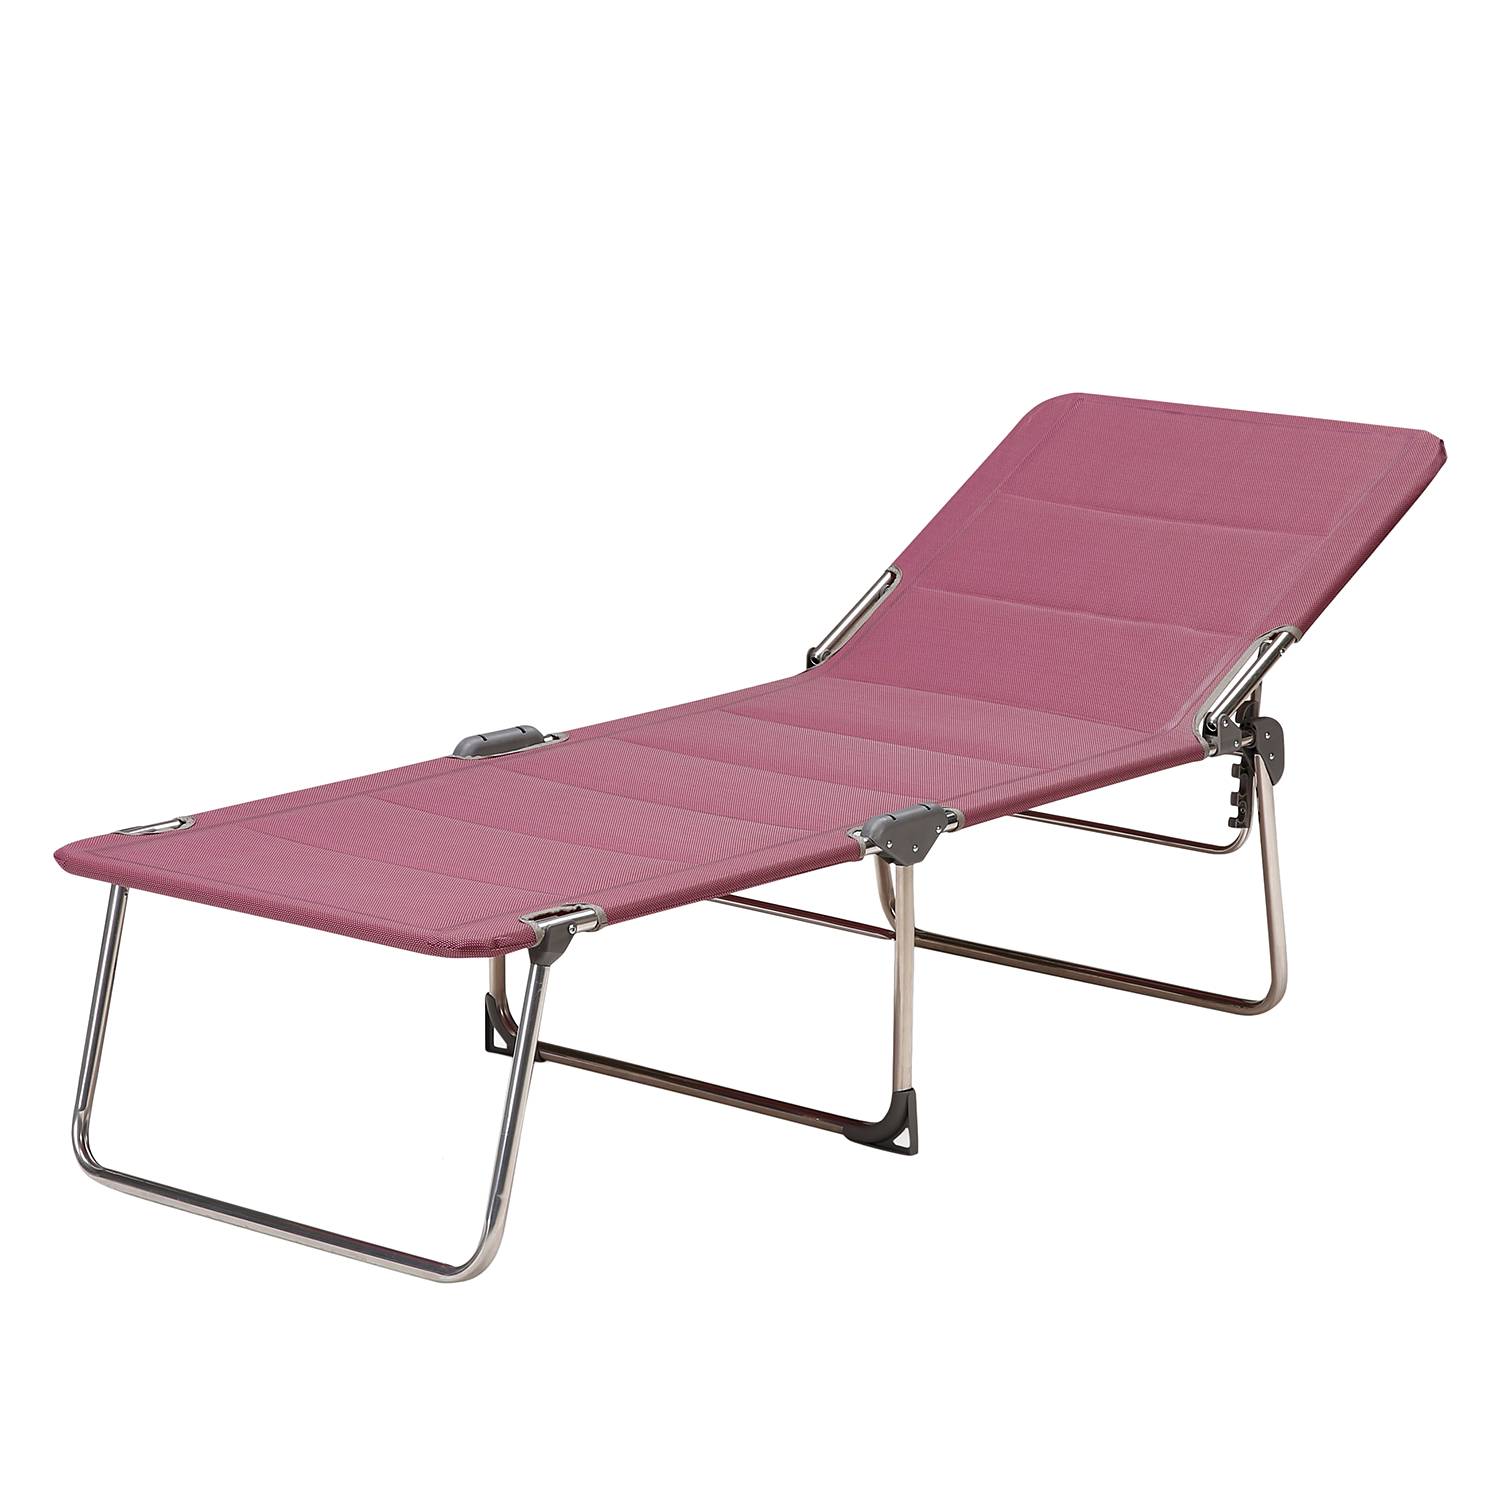 Image of Chaise longue Young II 000000001000155510